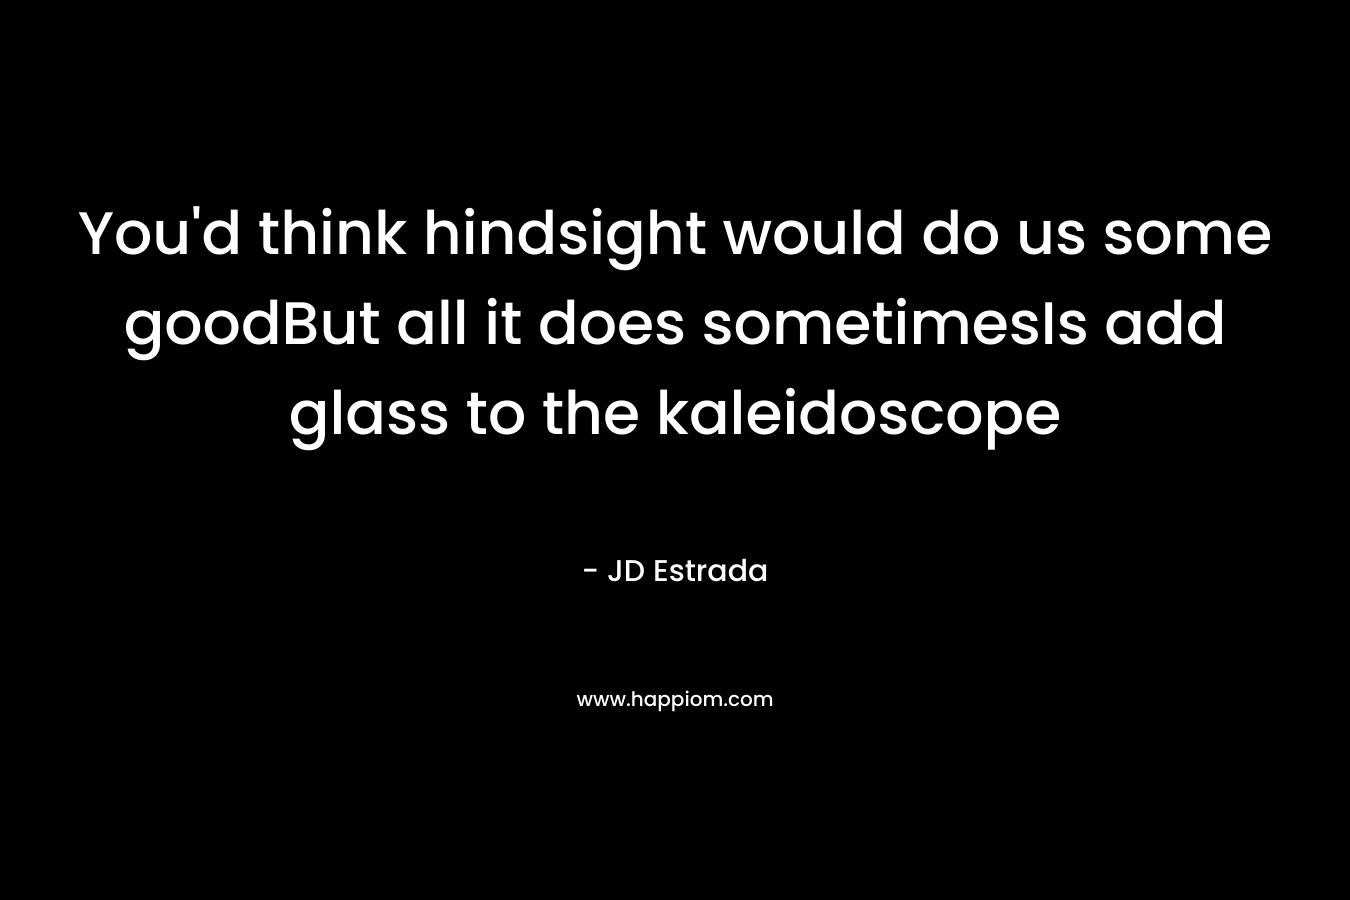 You'd think hindsight would do us some goodBut all it does sometimesIs add glass to the kaleidoscope